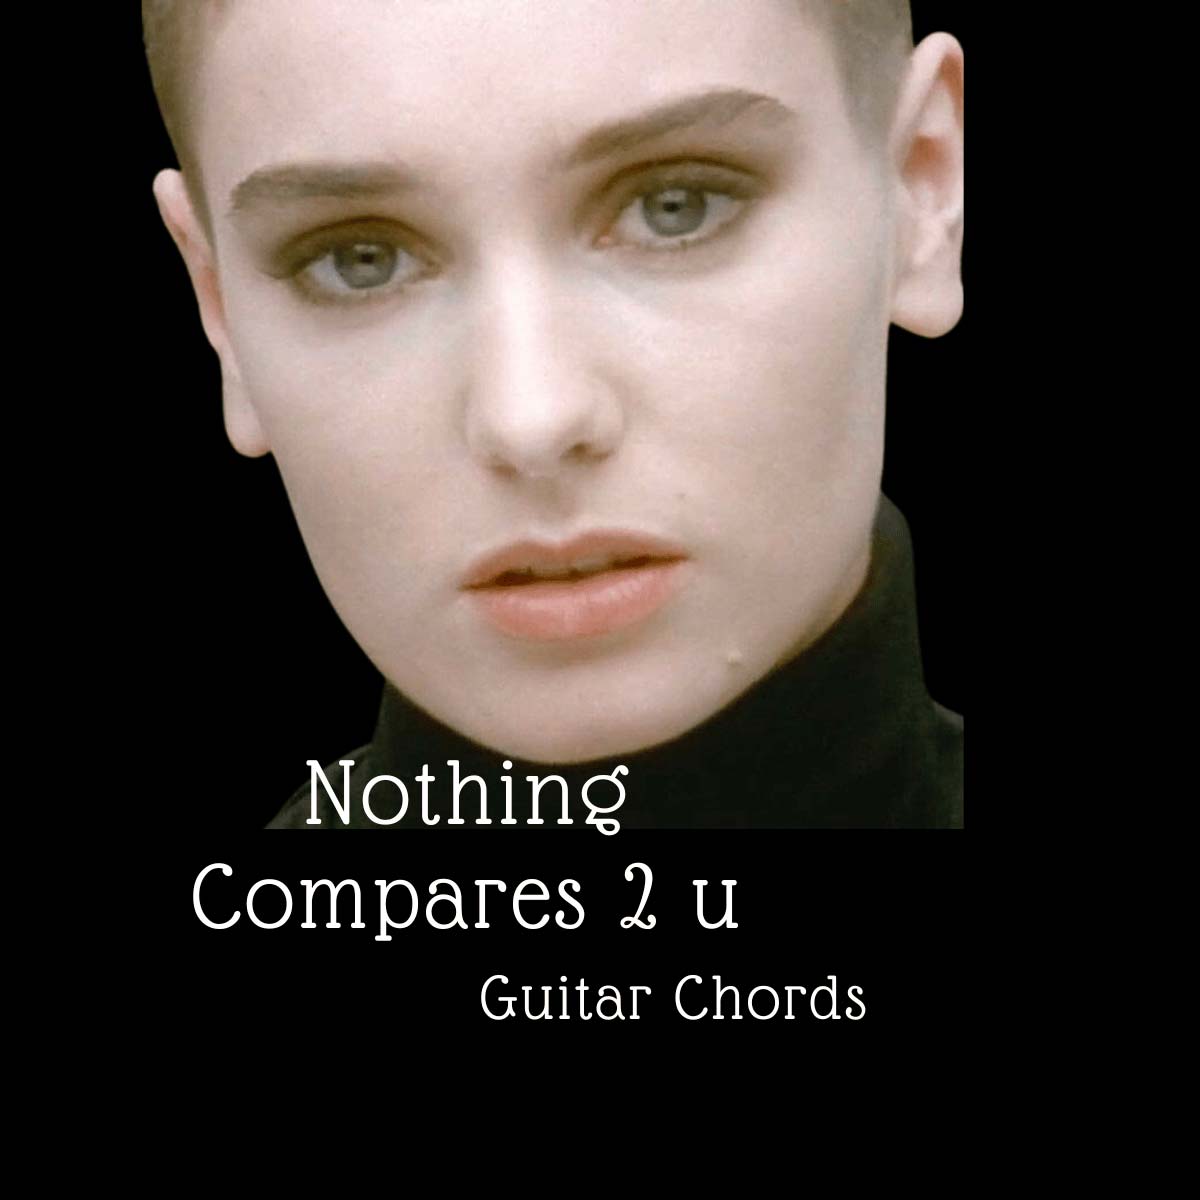 Nothing Compare 2 U Chords